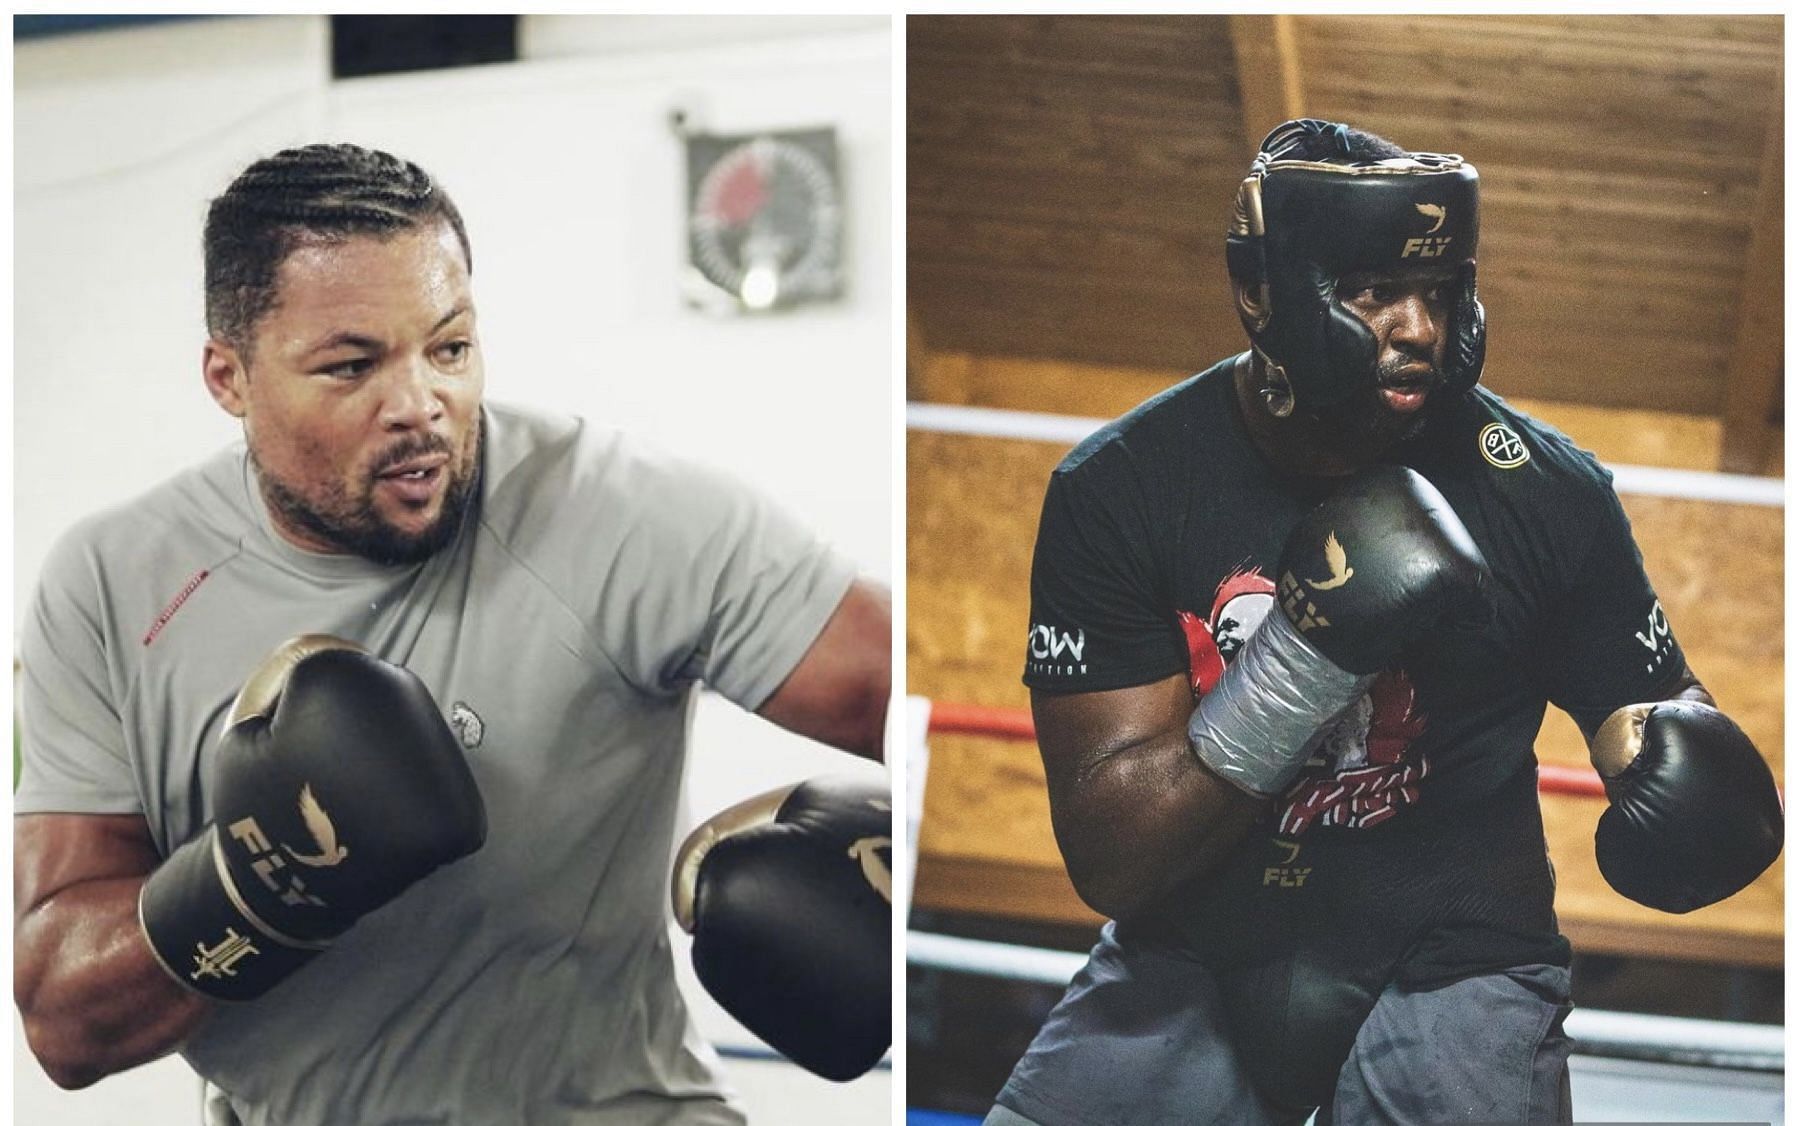 Joe Joyce (left), Dillian Whyte (right) - Images via @joejoyceboxing and @dillianwhyte on Instagram